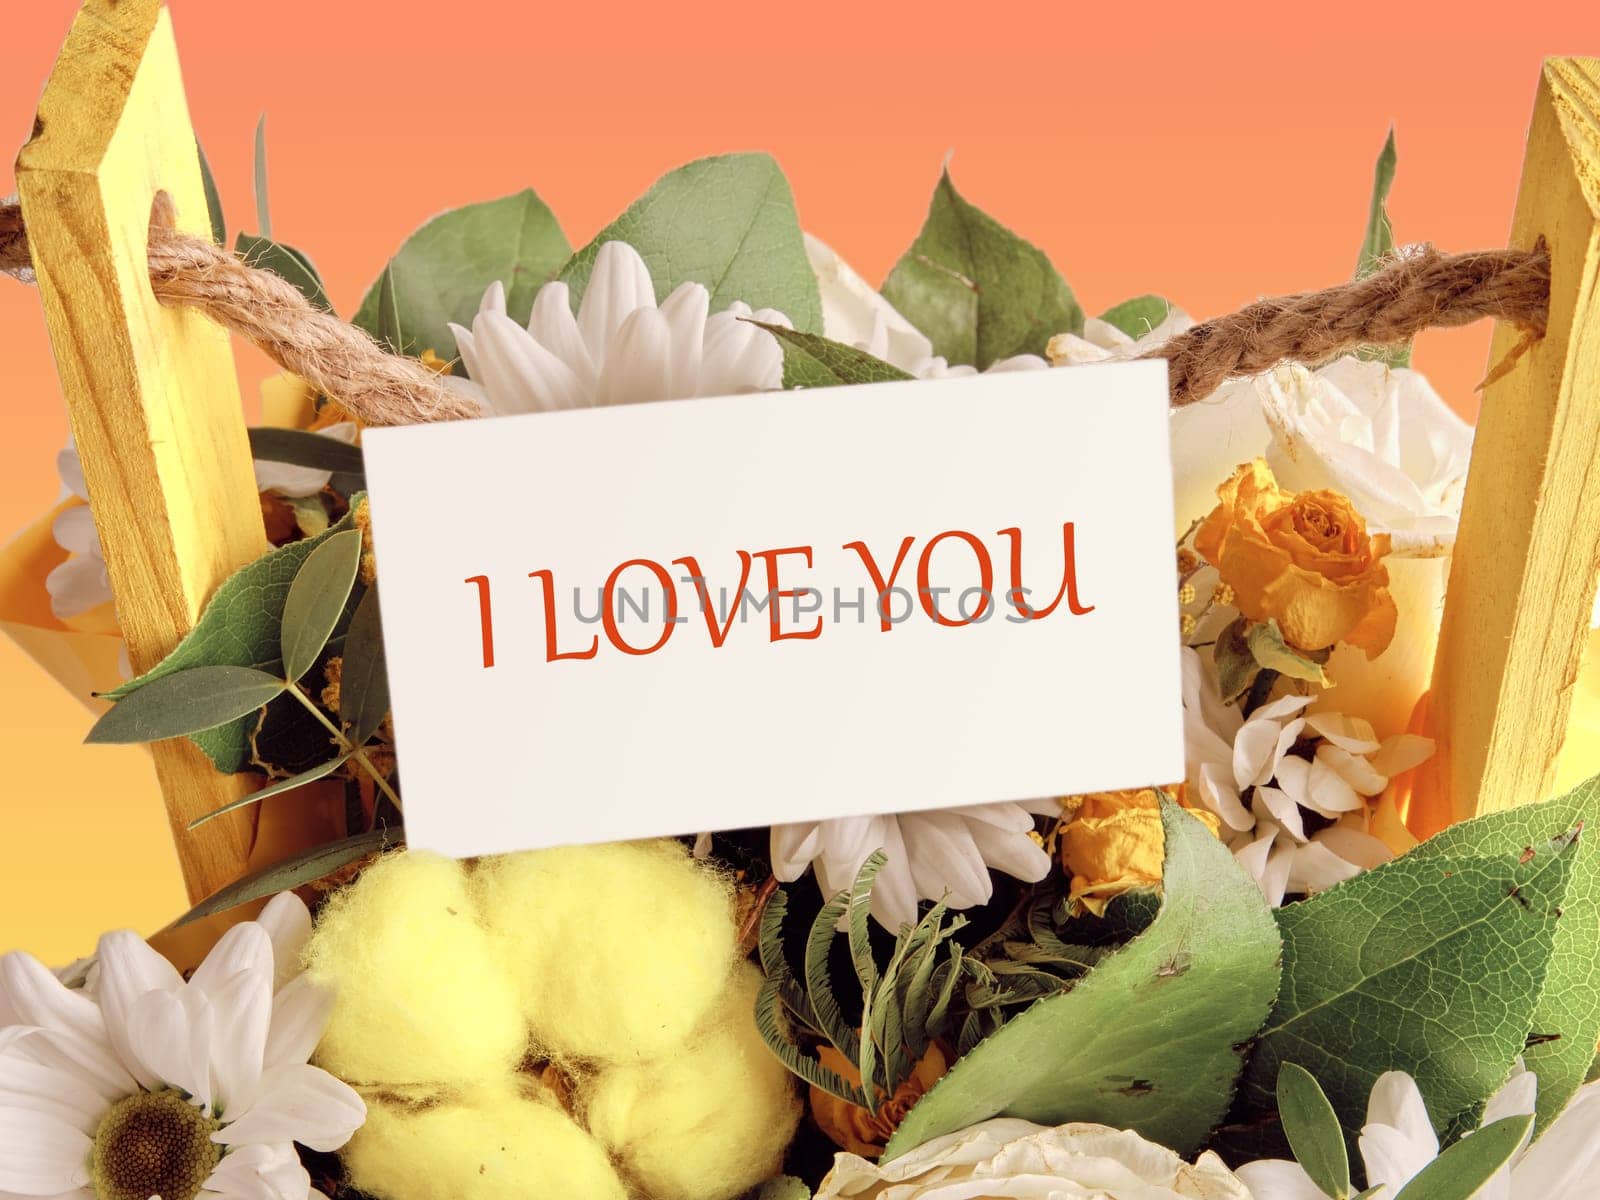 words I love you on a business card placed in a basket with blooming flowers